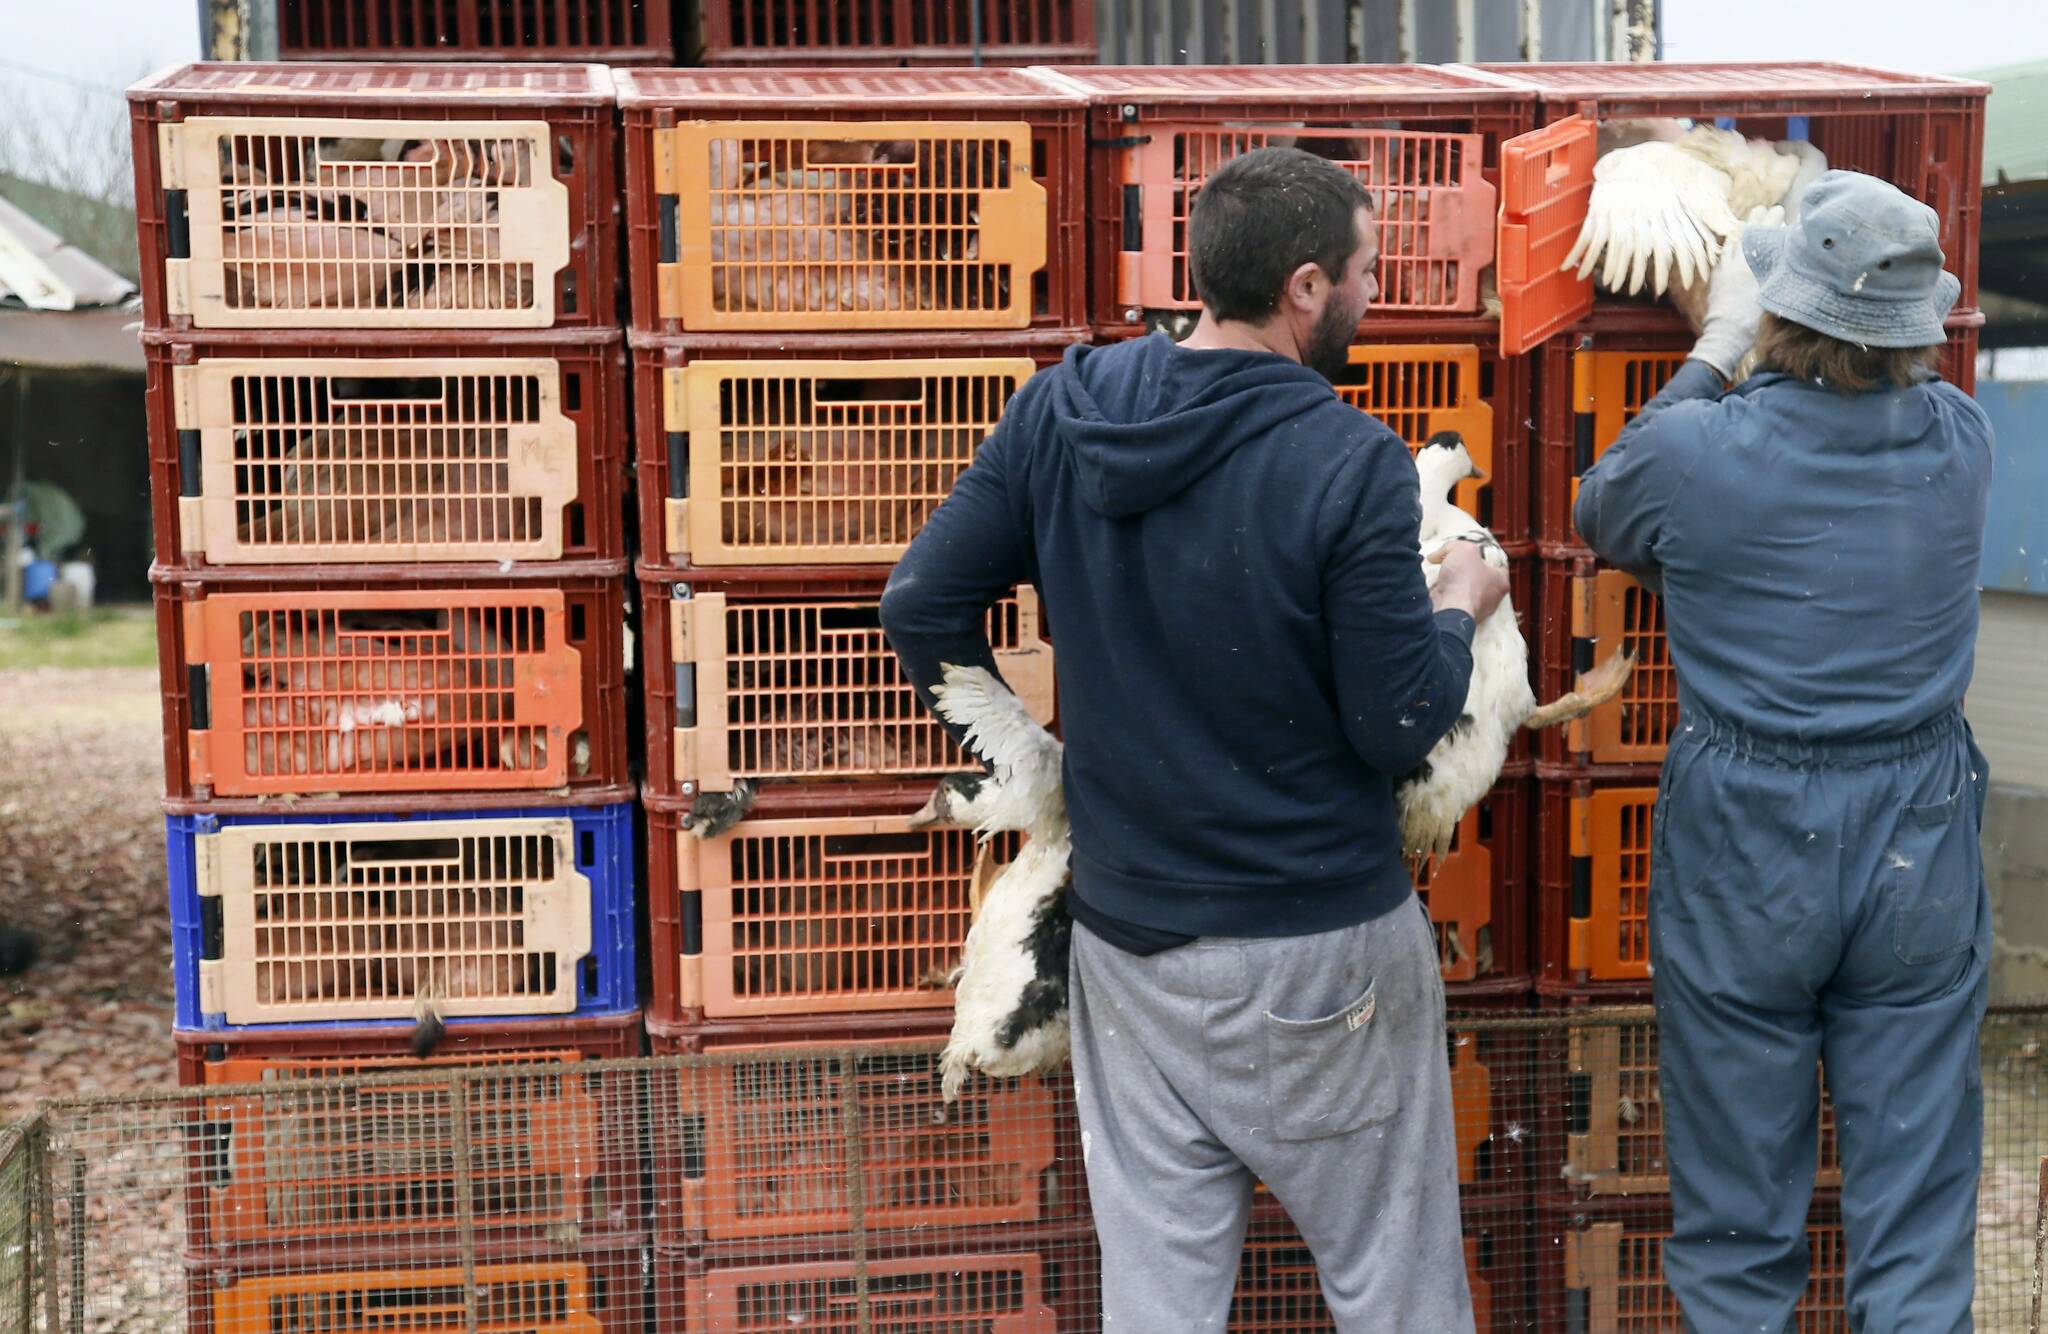 Duck breeders load ducks into a truck to bring them to a slaughterhouse at a poultry farm in Saint Aubin, southwestern France, Wednesday, Feb. 22, 2017. France’s agriculture ministry had ordered all remaining 360,000 ducks in a key poultry-producing region slaughtered to try to stem a growing outbreak of bird flu. (AP Photo/Bob Edme)